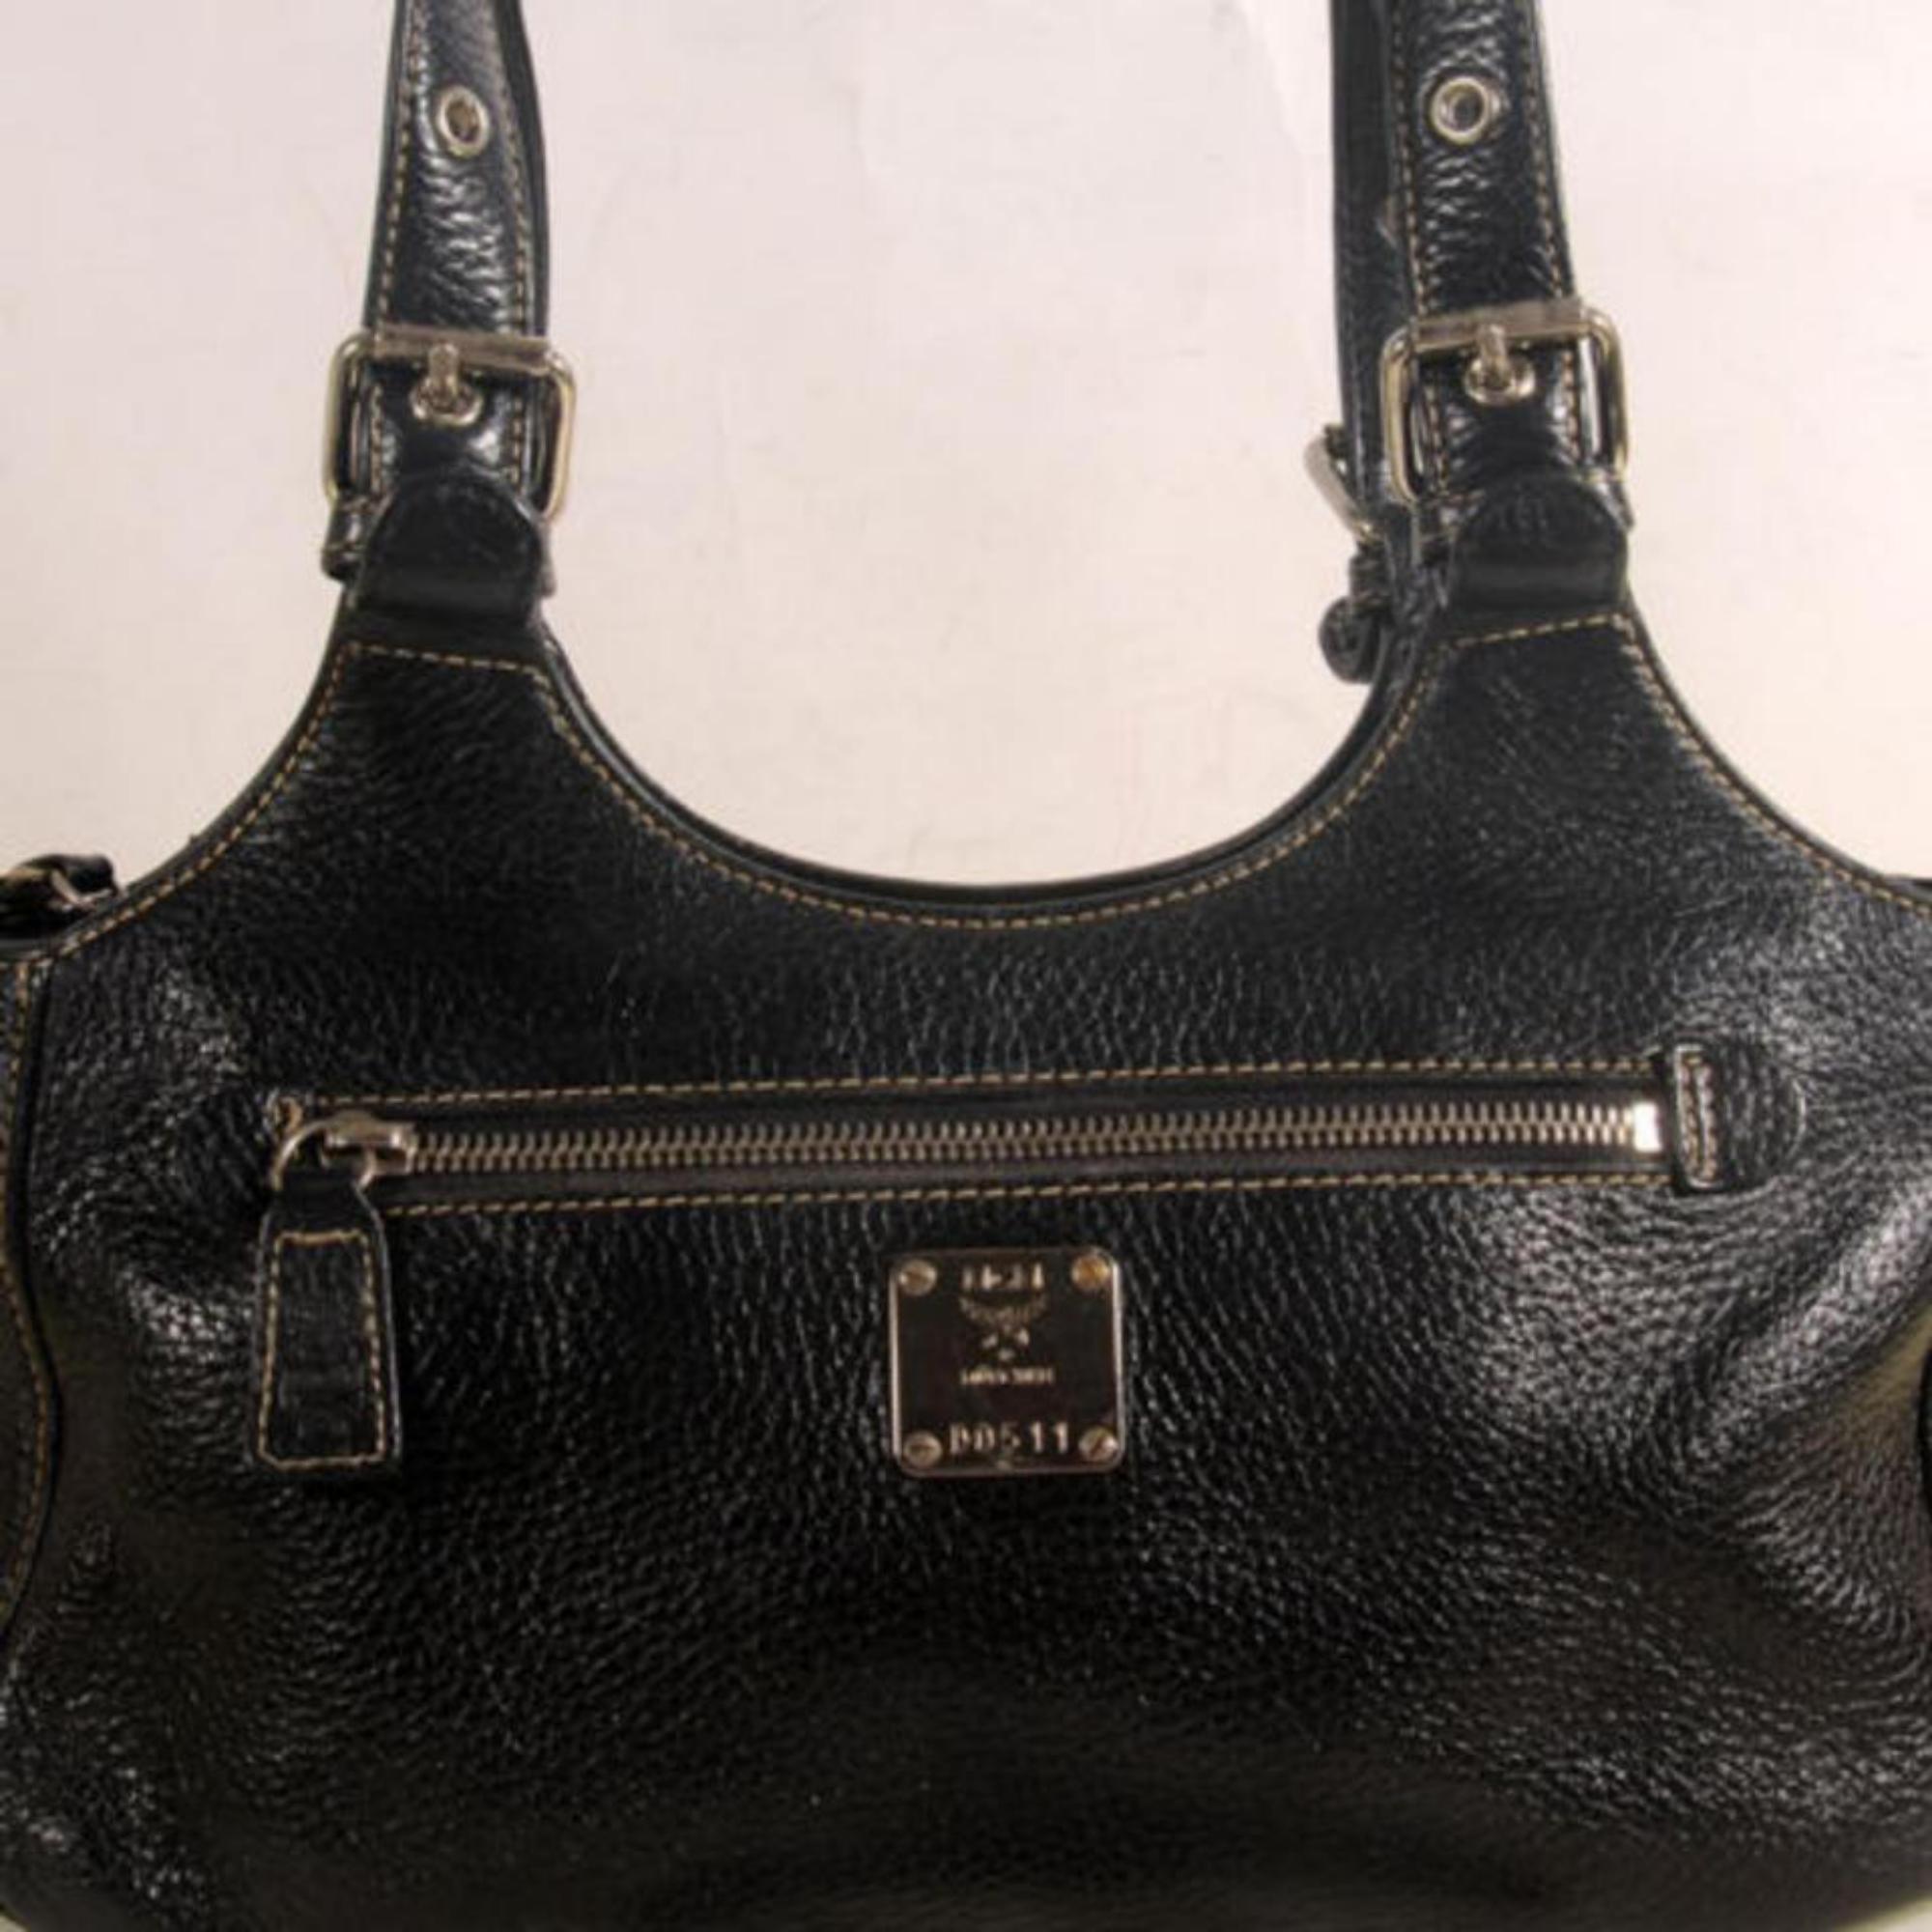 VERY GOOD VINTAGE CONDITION
(7.5/10 or B+)
Includes Dust Bag
This item does not come with any extra accessories.
Please review photos for more details.
Color appearance may vary depending on your monitor settings.
sku : 869327